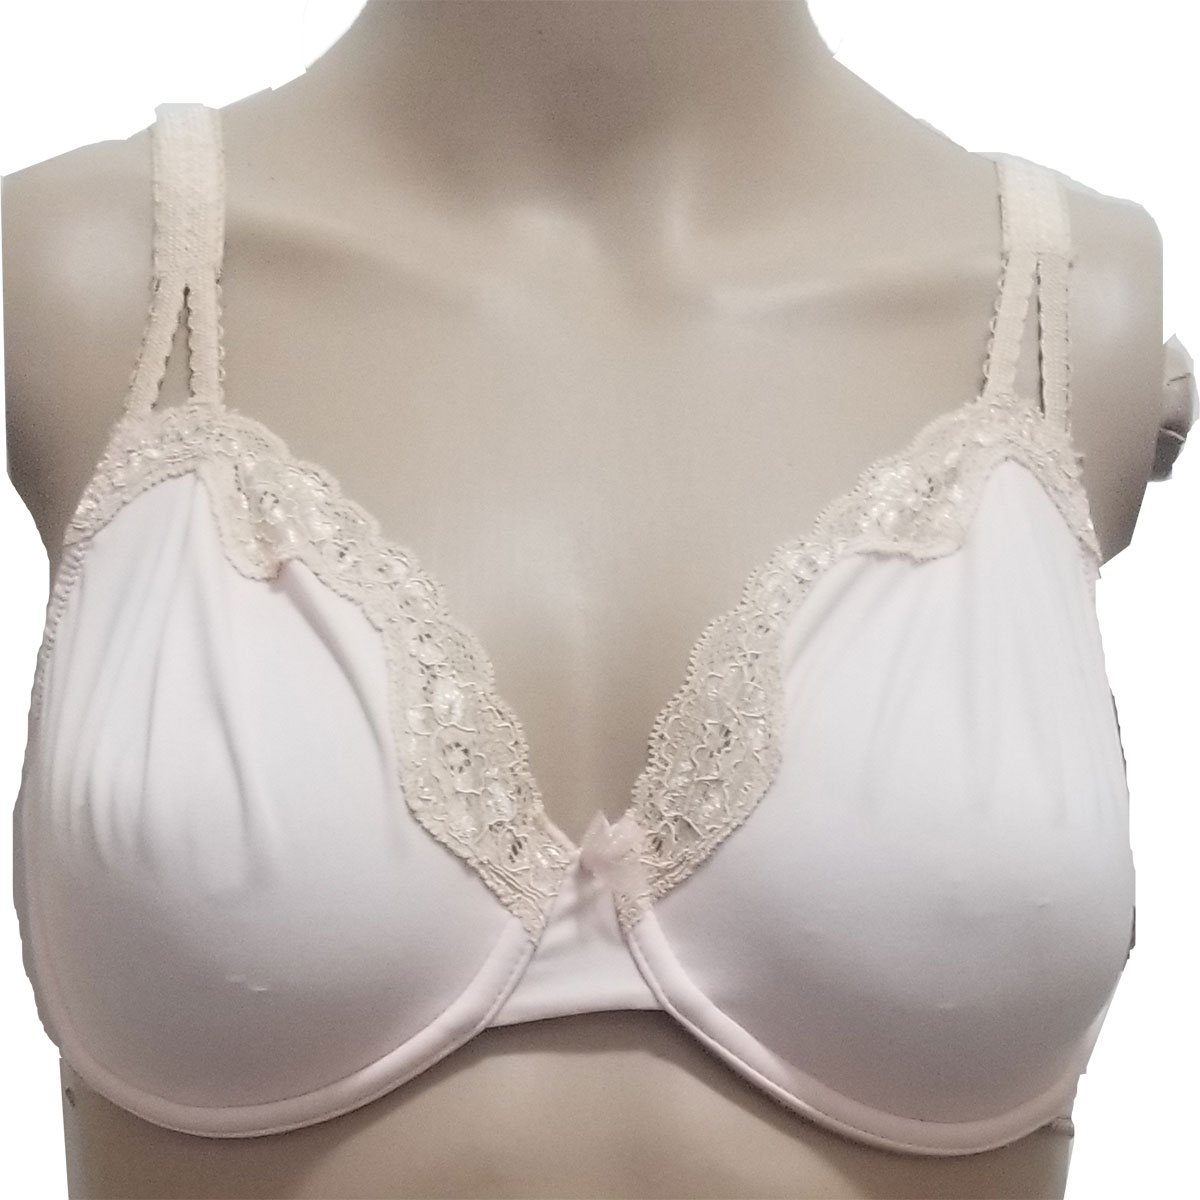 Whimsy by Lunaire Women's Aruba Lace Trim Seamless Underwire Bra Pink Ivy  34D